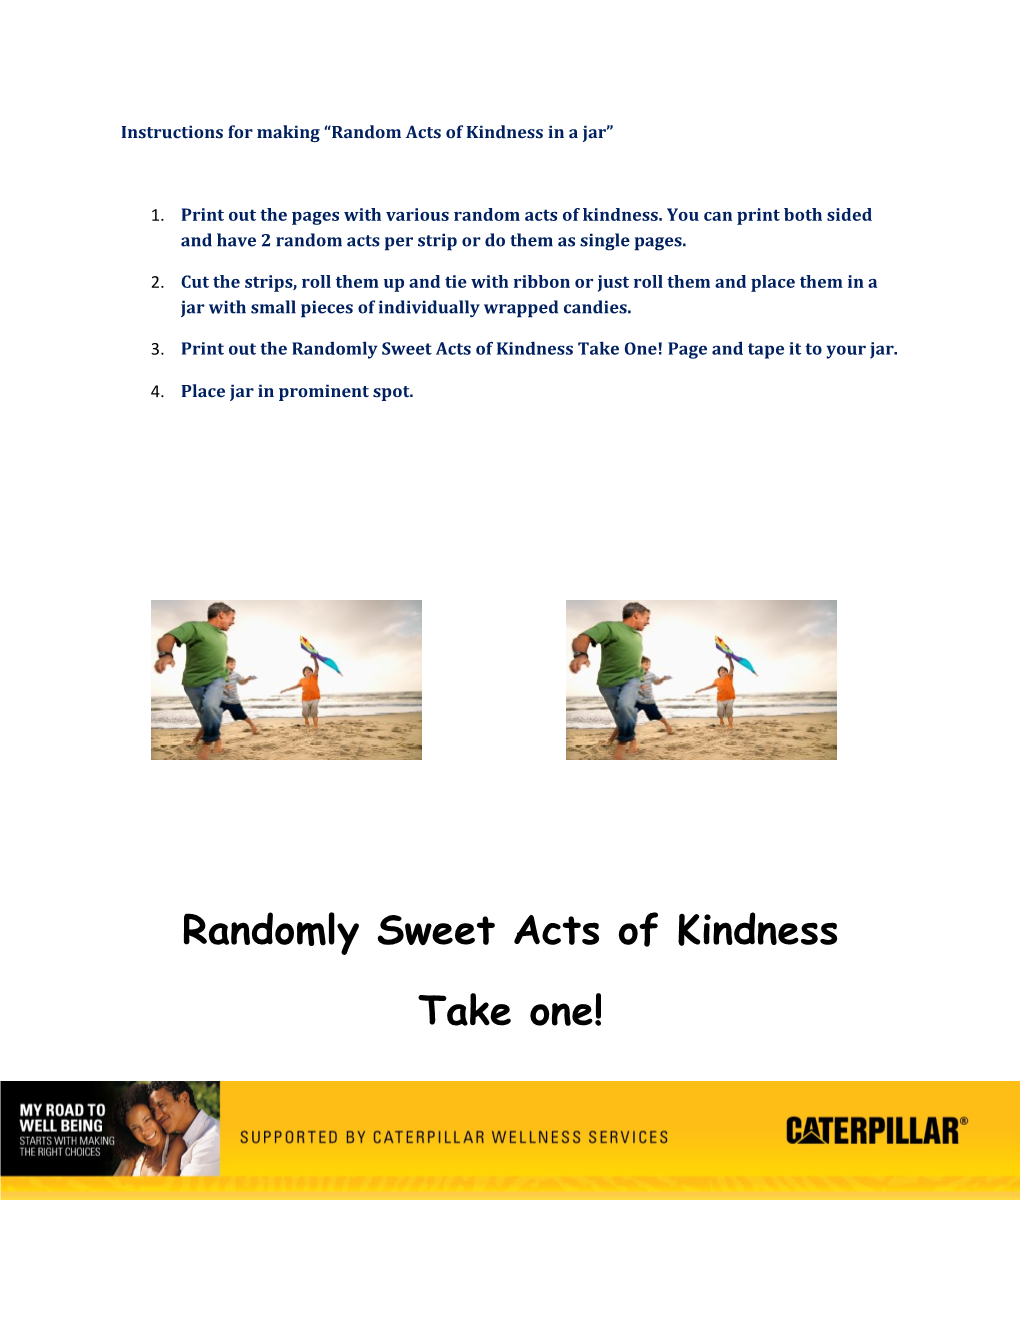 Instructions for Making Random Acts of Kindness in a Jar